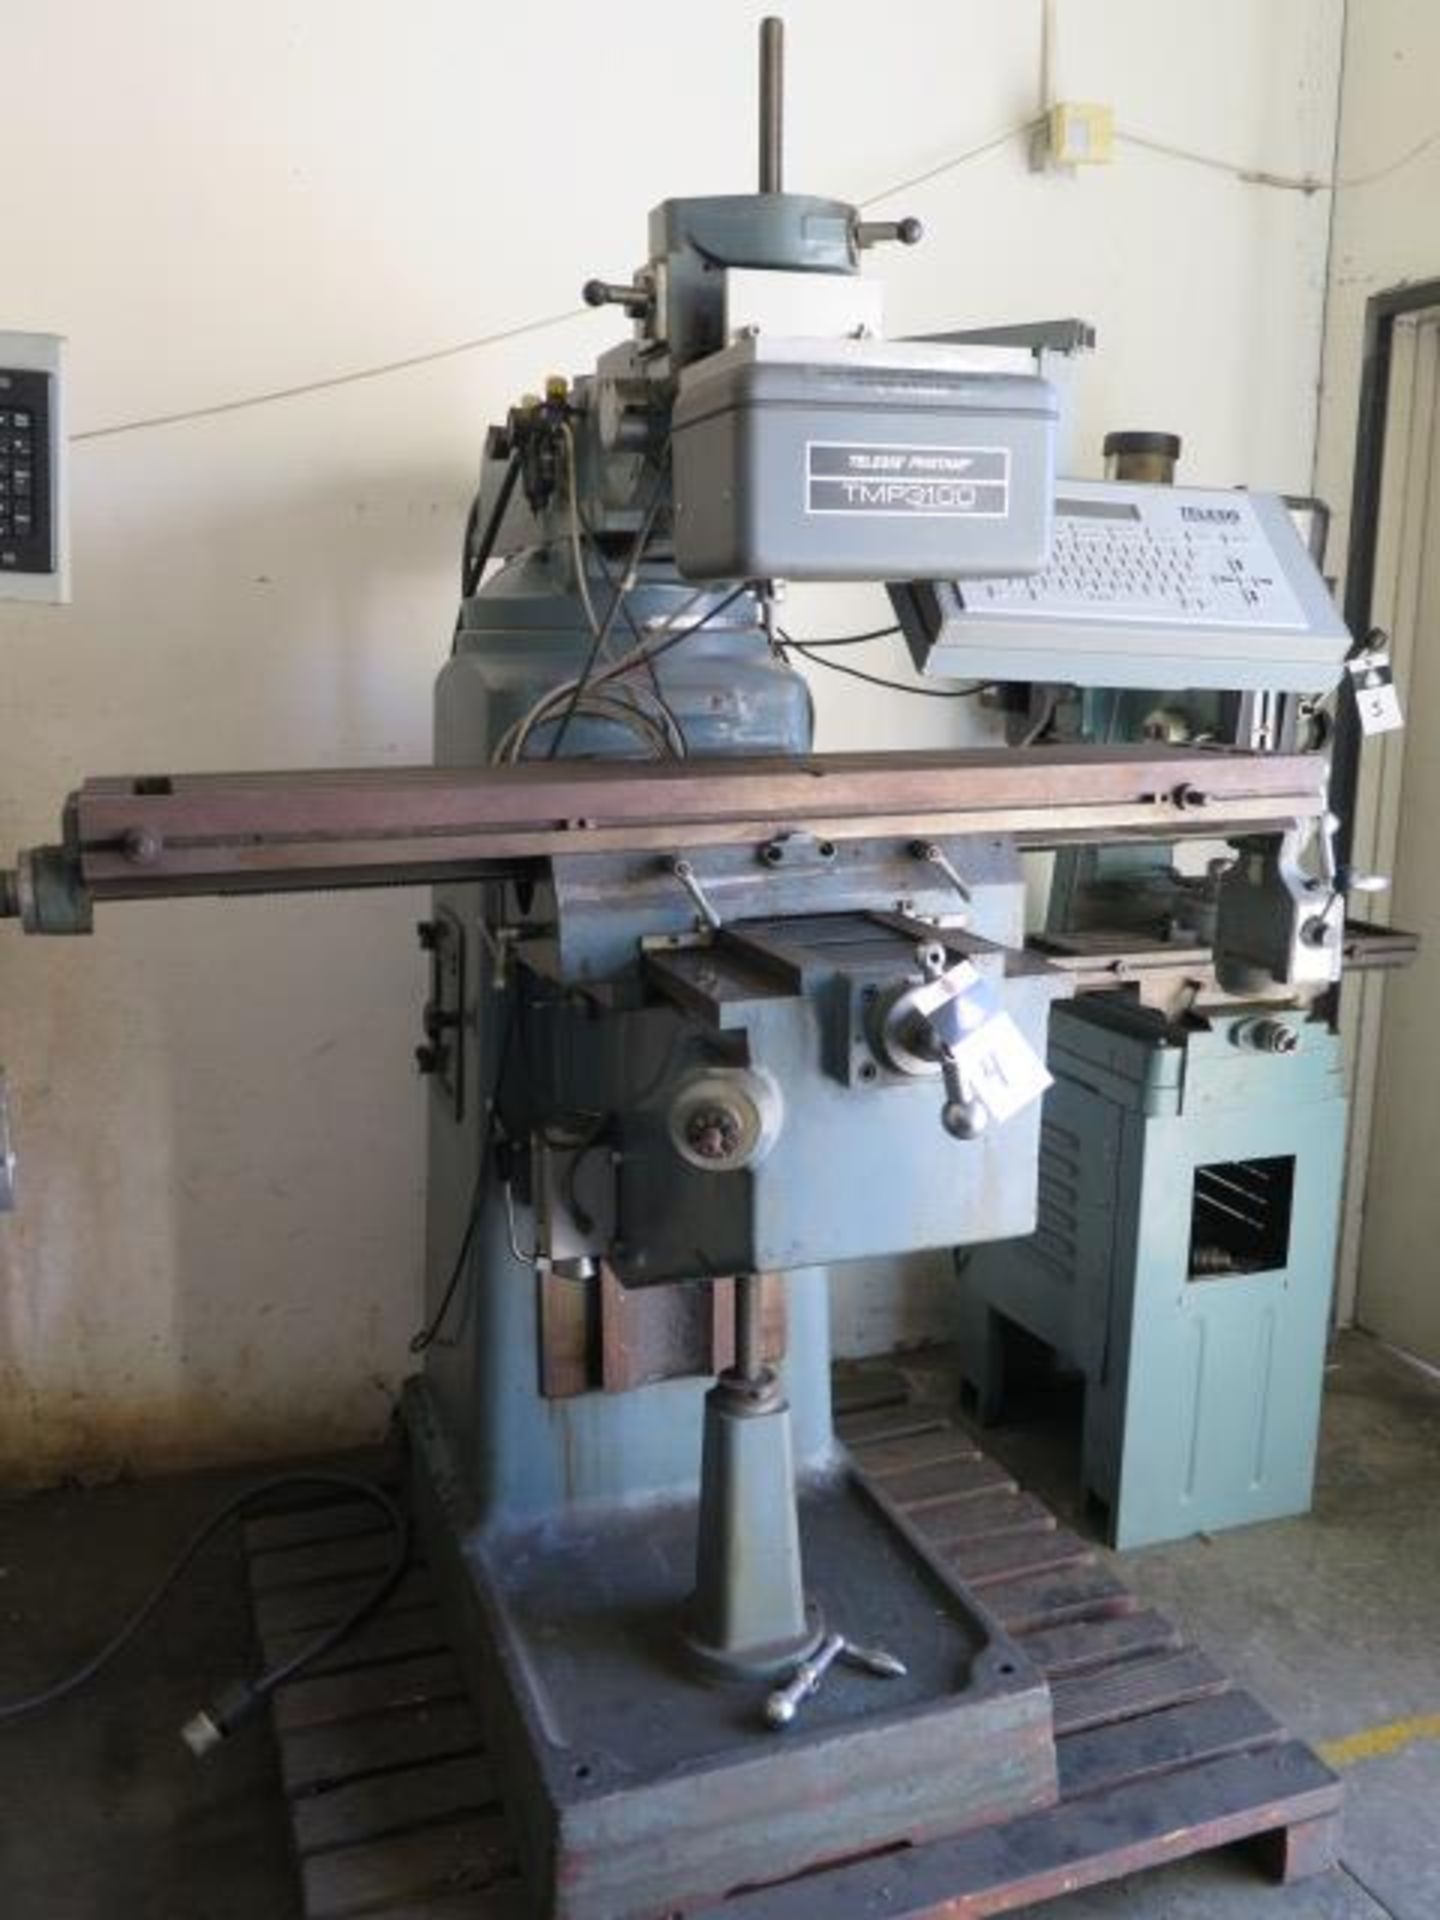 Telesis Pinstamp TMP3100 Pin Stamping Machine (On Vertical Mill Base) w/Telesis Controls, SOLD AS IS - Image 2 of 9